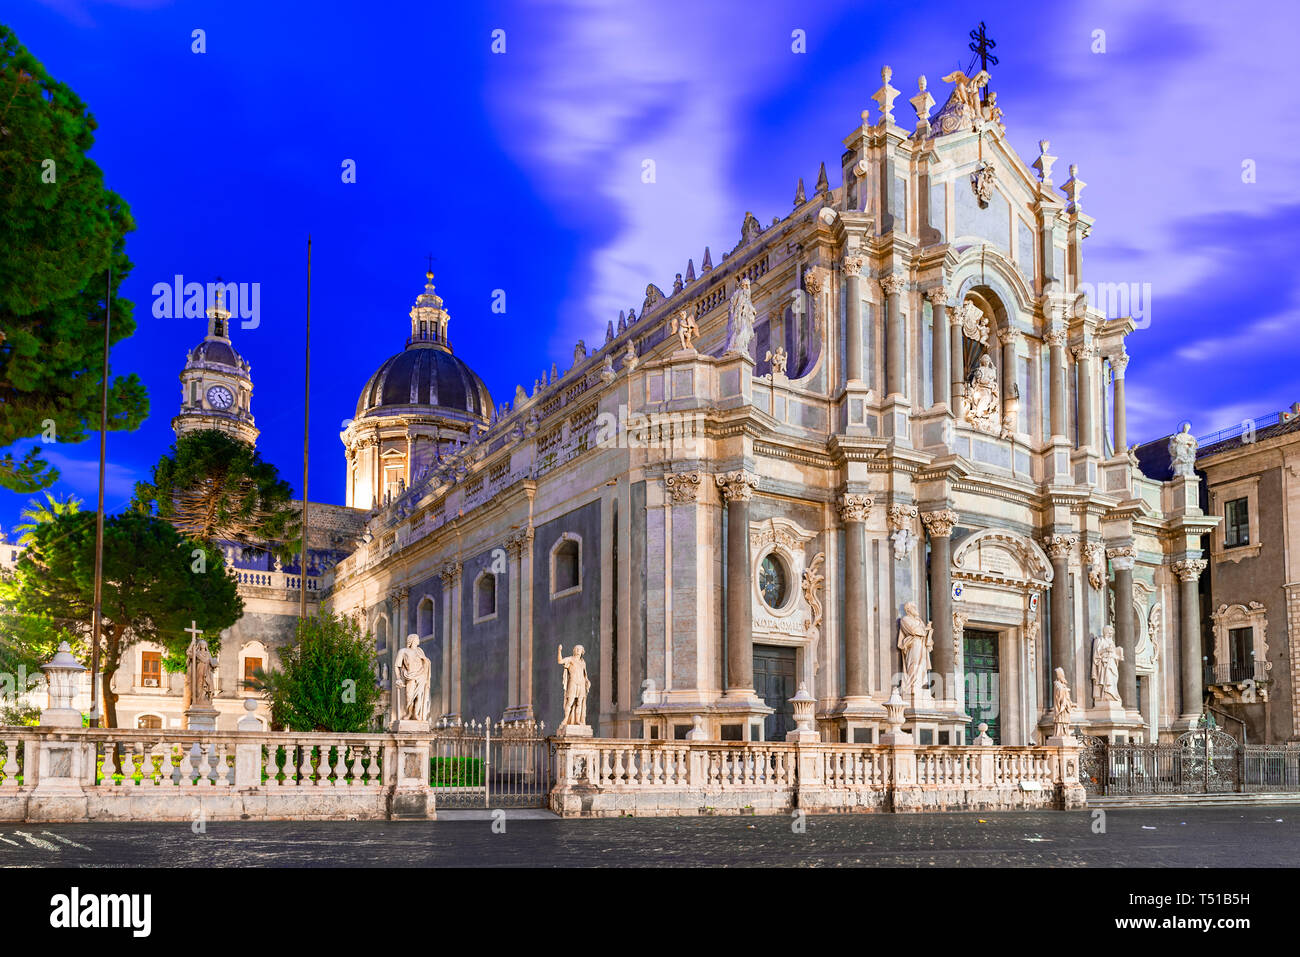 Catania, Sicily island, Italy: Night view of the Cathedral of Santa Agatha in Piazza Duomo Stock Photo